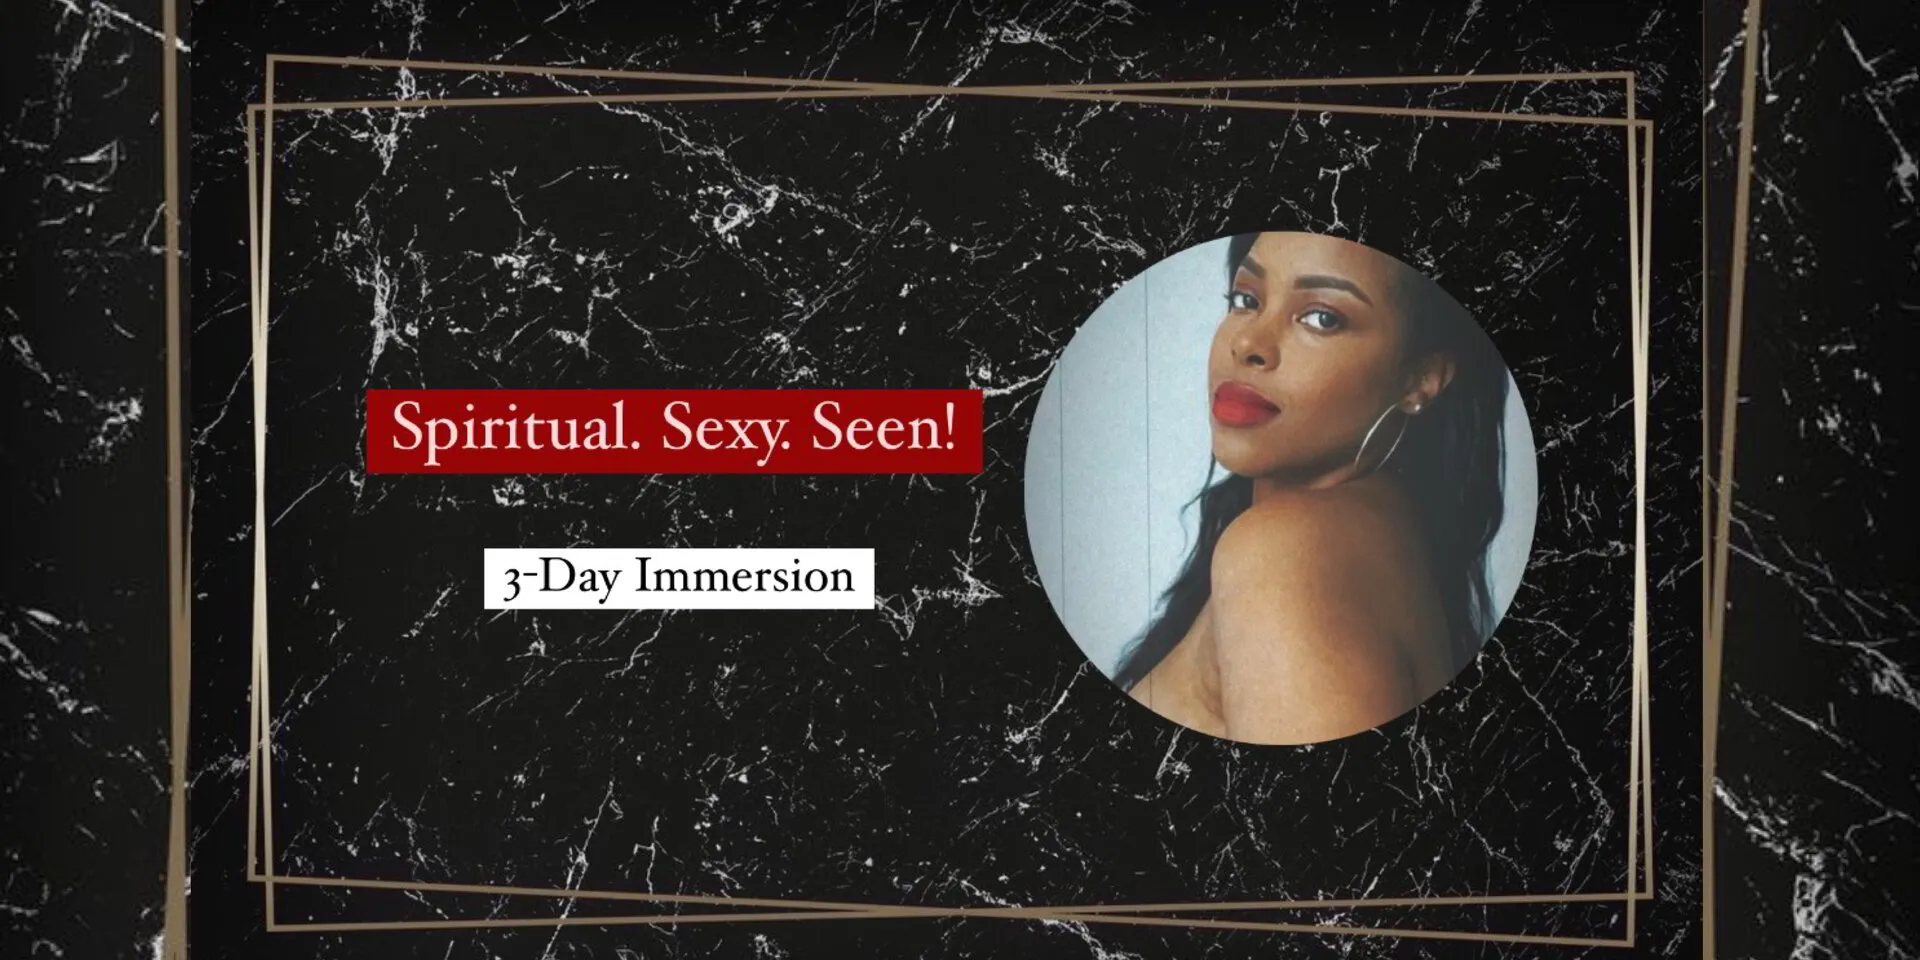 Spiritual, Sexy, Seen Immersion Experience